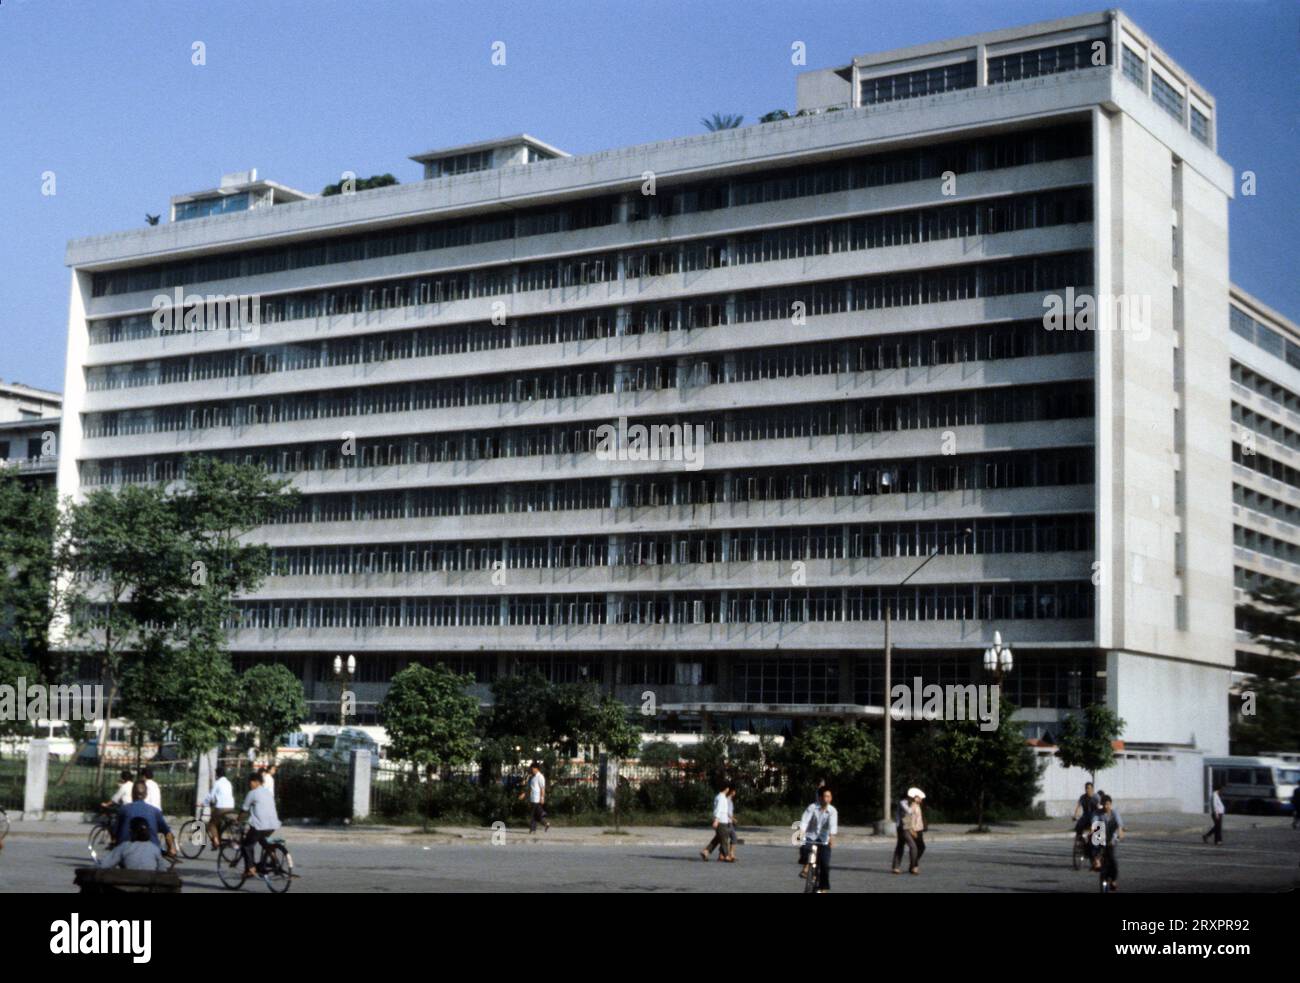 Exterior view of the 'Trade Fair' building, with pedestrians in the foreground, in Guangzhou, China, 1979 Stock Photo